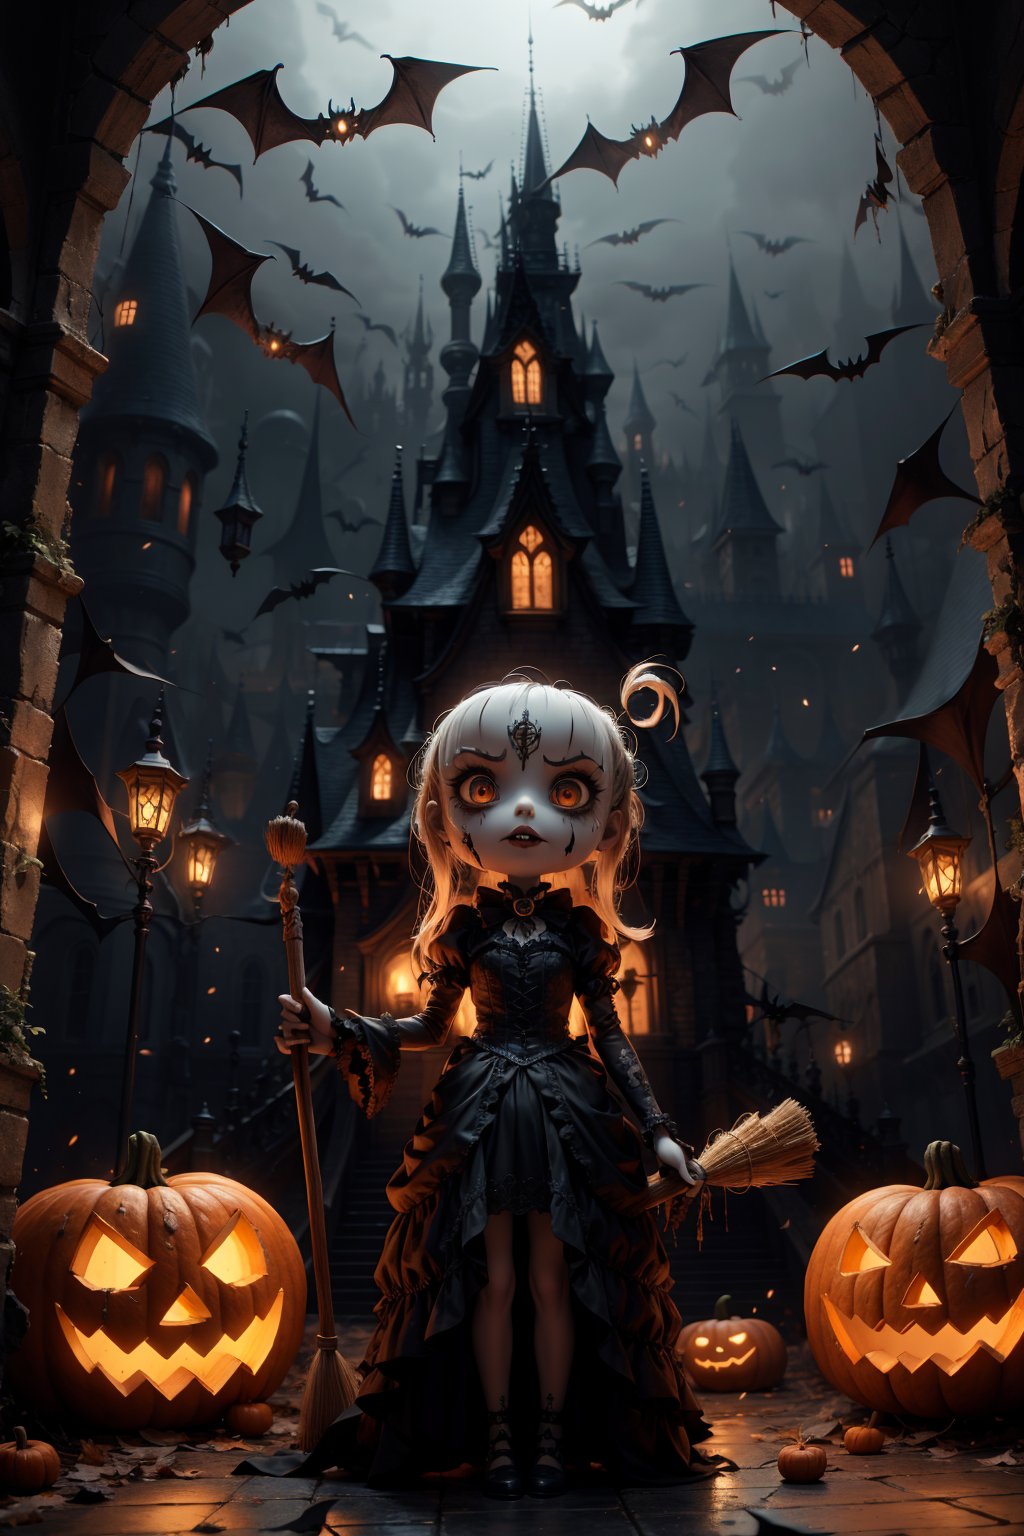 1girl,,gothic style,,, holloween party, Sony RX100 VII with Built-in 24-200mm f-2.8-4.5, vampire costume, pumkin, bat, broom, dynamic angle, gothic, castle, . dark, mysterious, haunting, dramatic, ornate, detailed,, Jack-o'-lantern